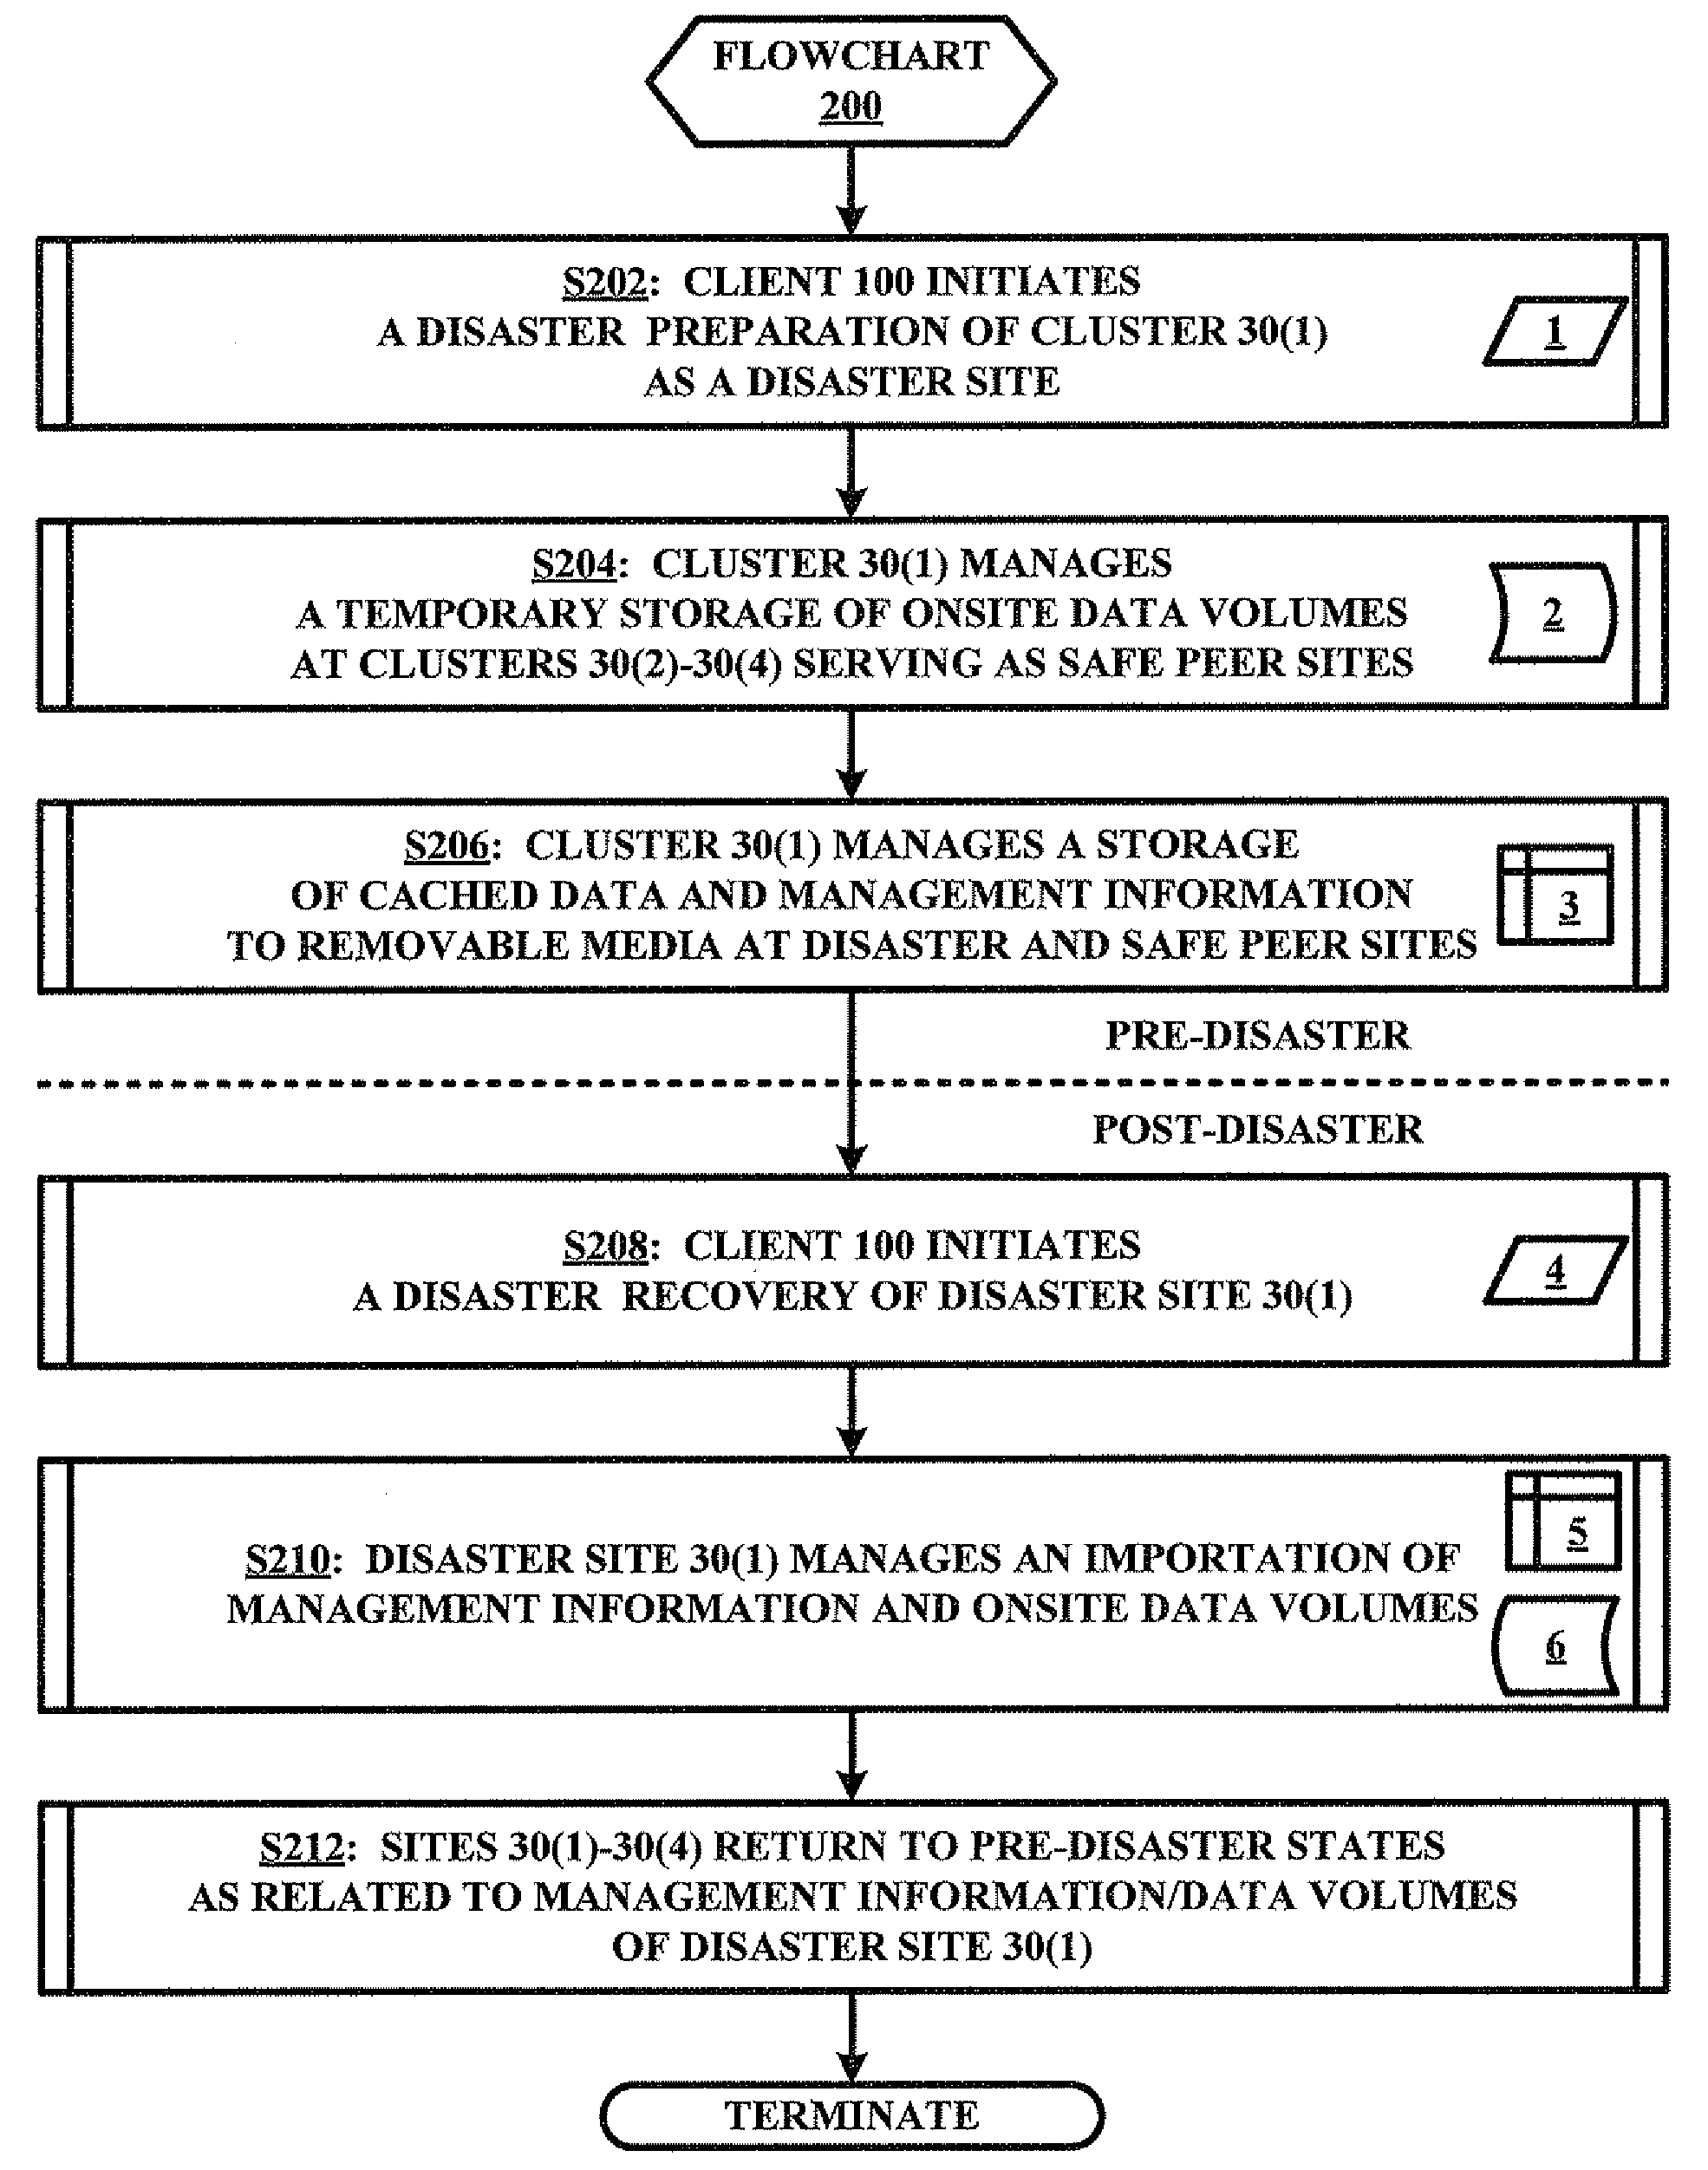 Method and System for Insuring Data Integrity in Anticipation of a Disaster